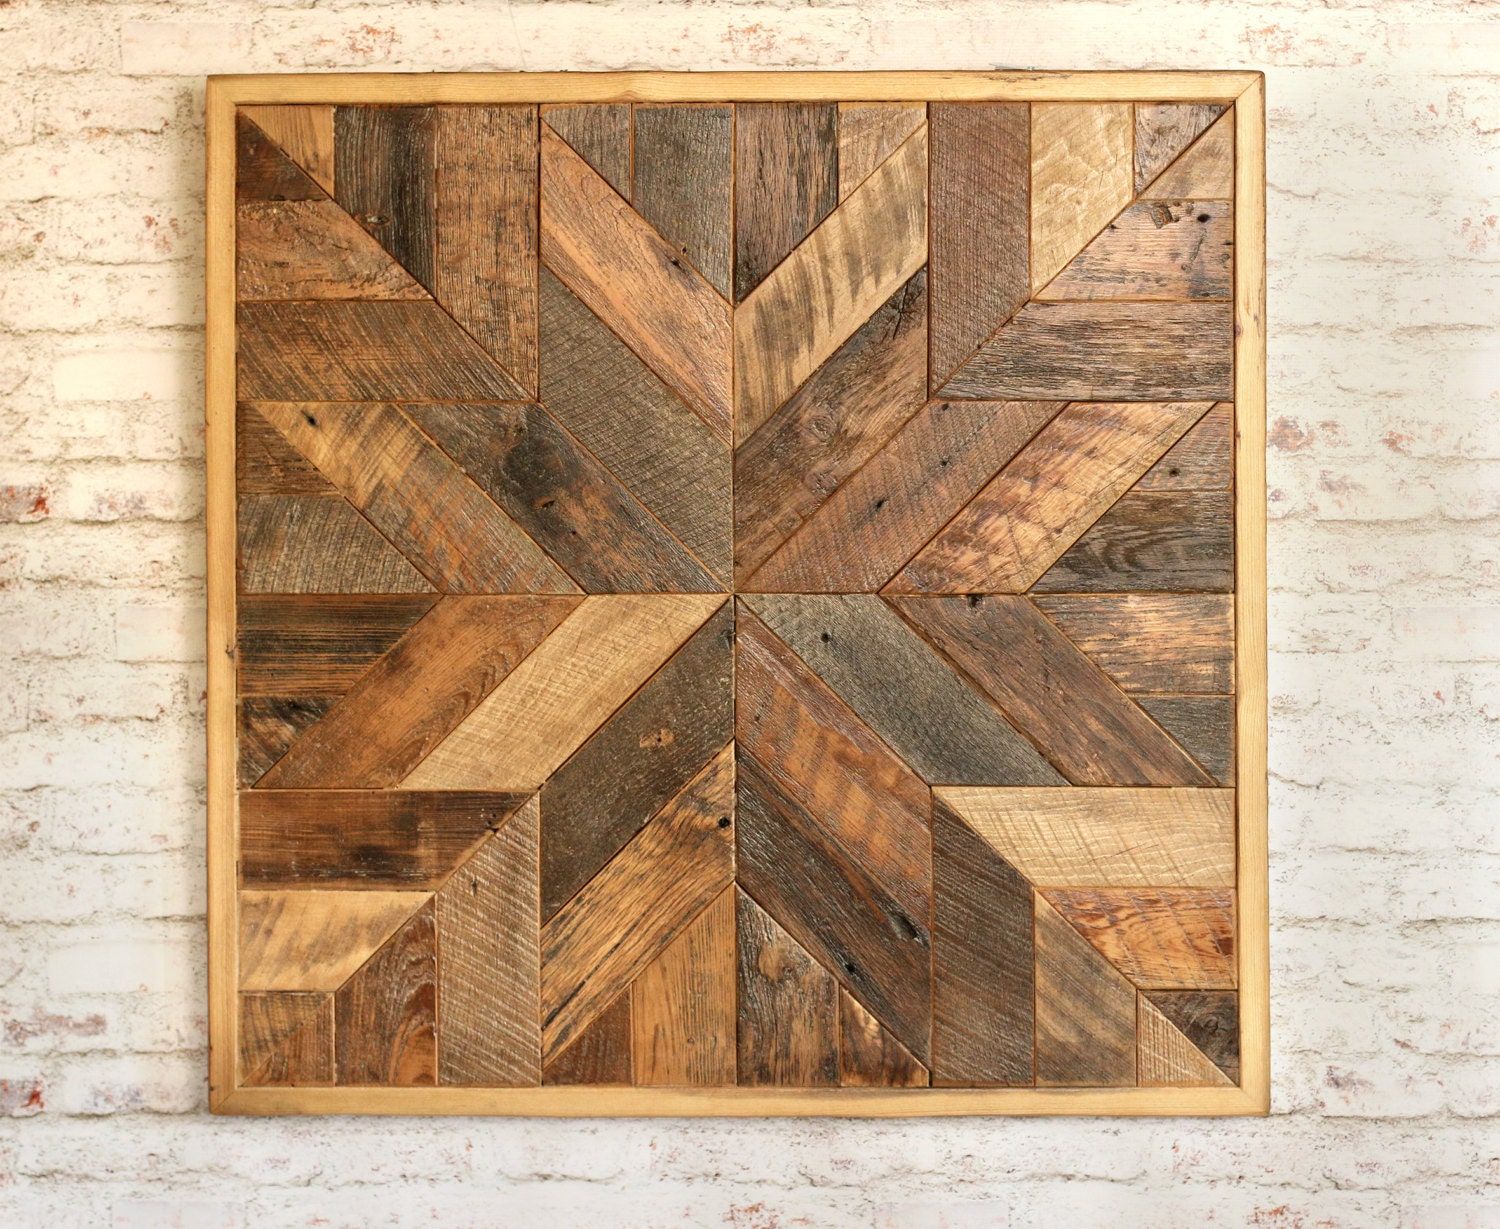 Reclaimed Wood Quilt Square 36 Inch Geometric Wall Art Throughout 2018 Metallic Rugged Wooden Wall Art (View 5 of 20)